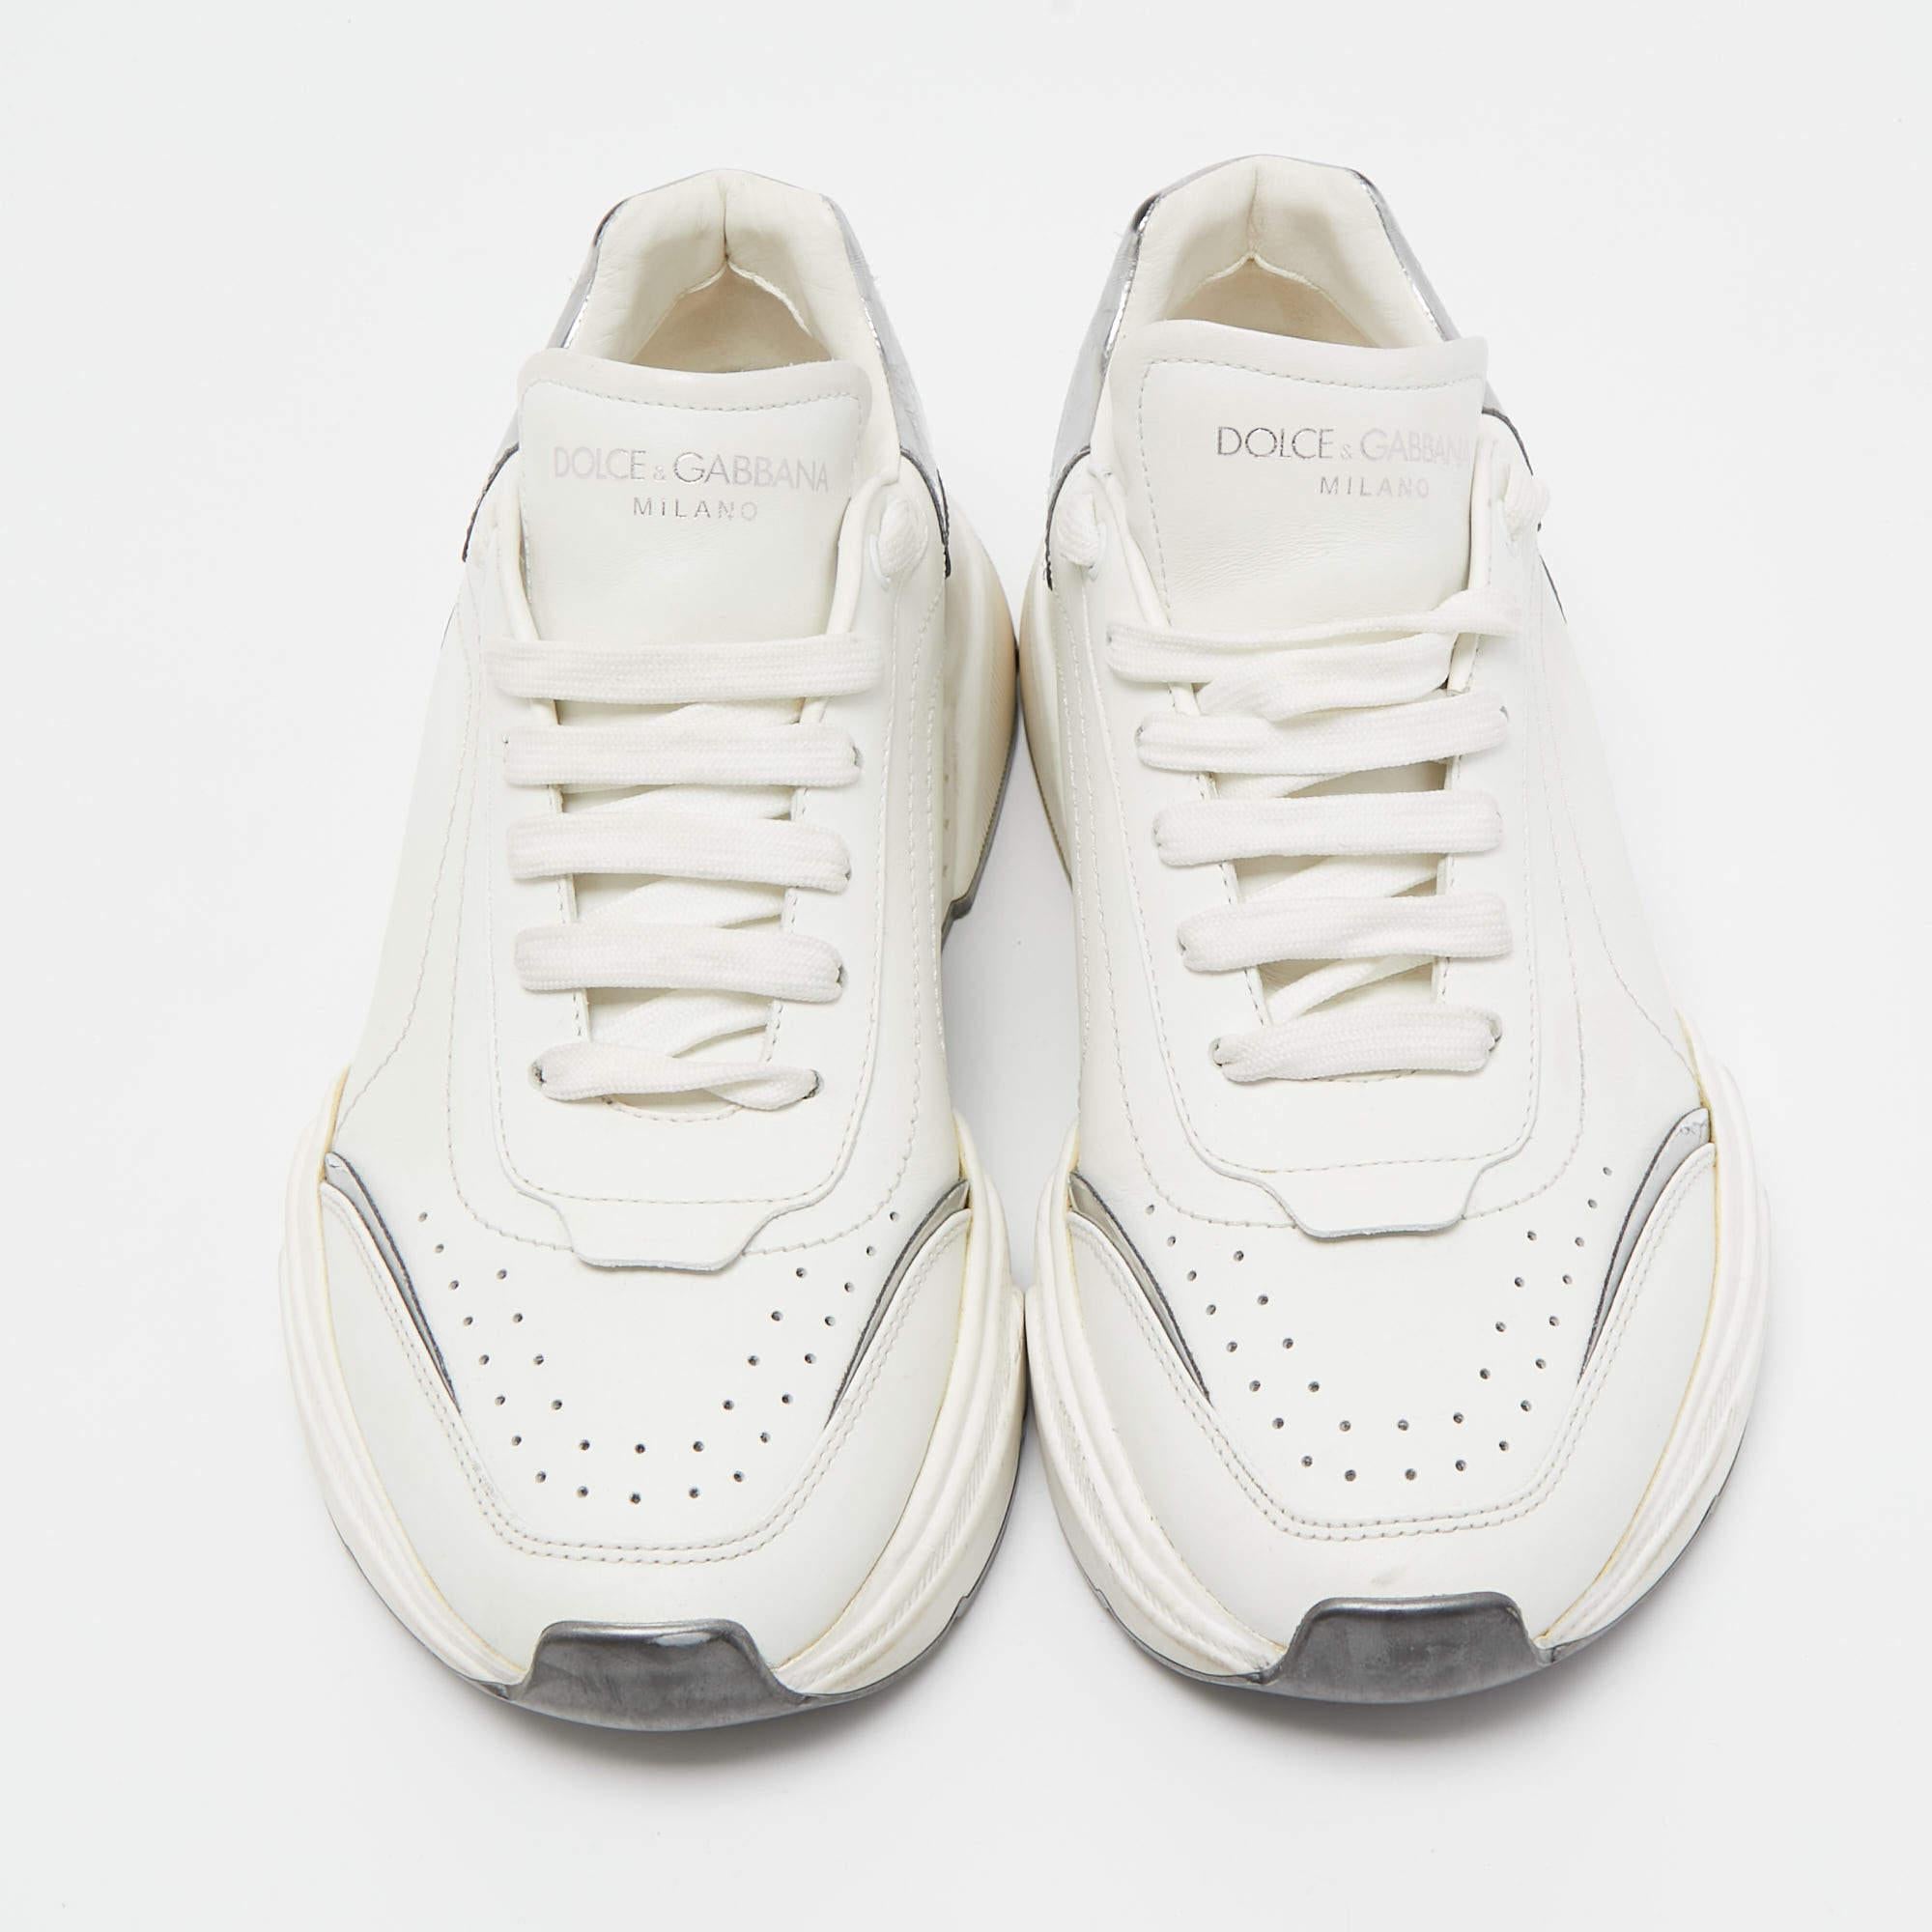 Dolce & Gabbana White/Silver Leather Daymaster Sneakers Size 41 For Sale 2